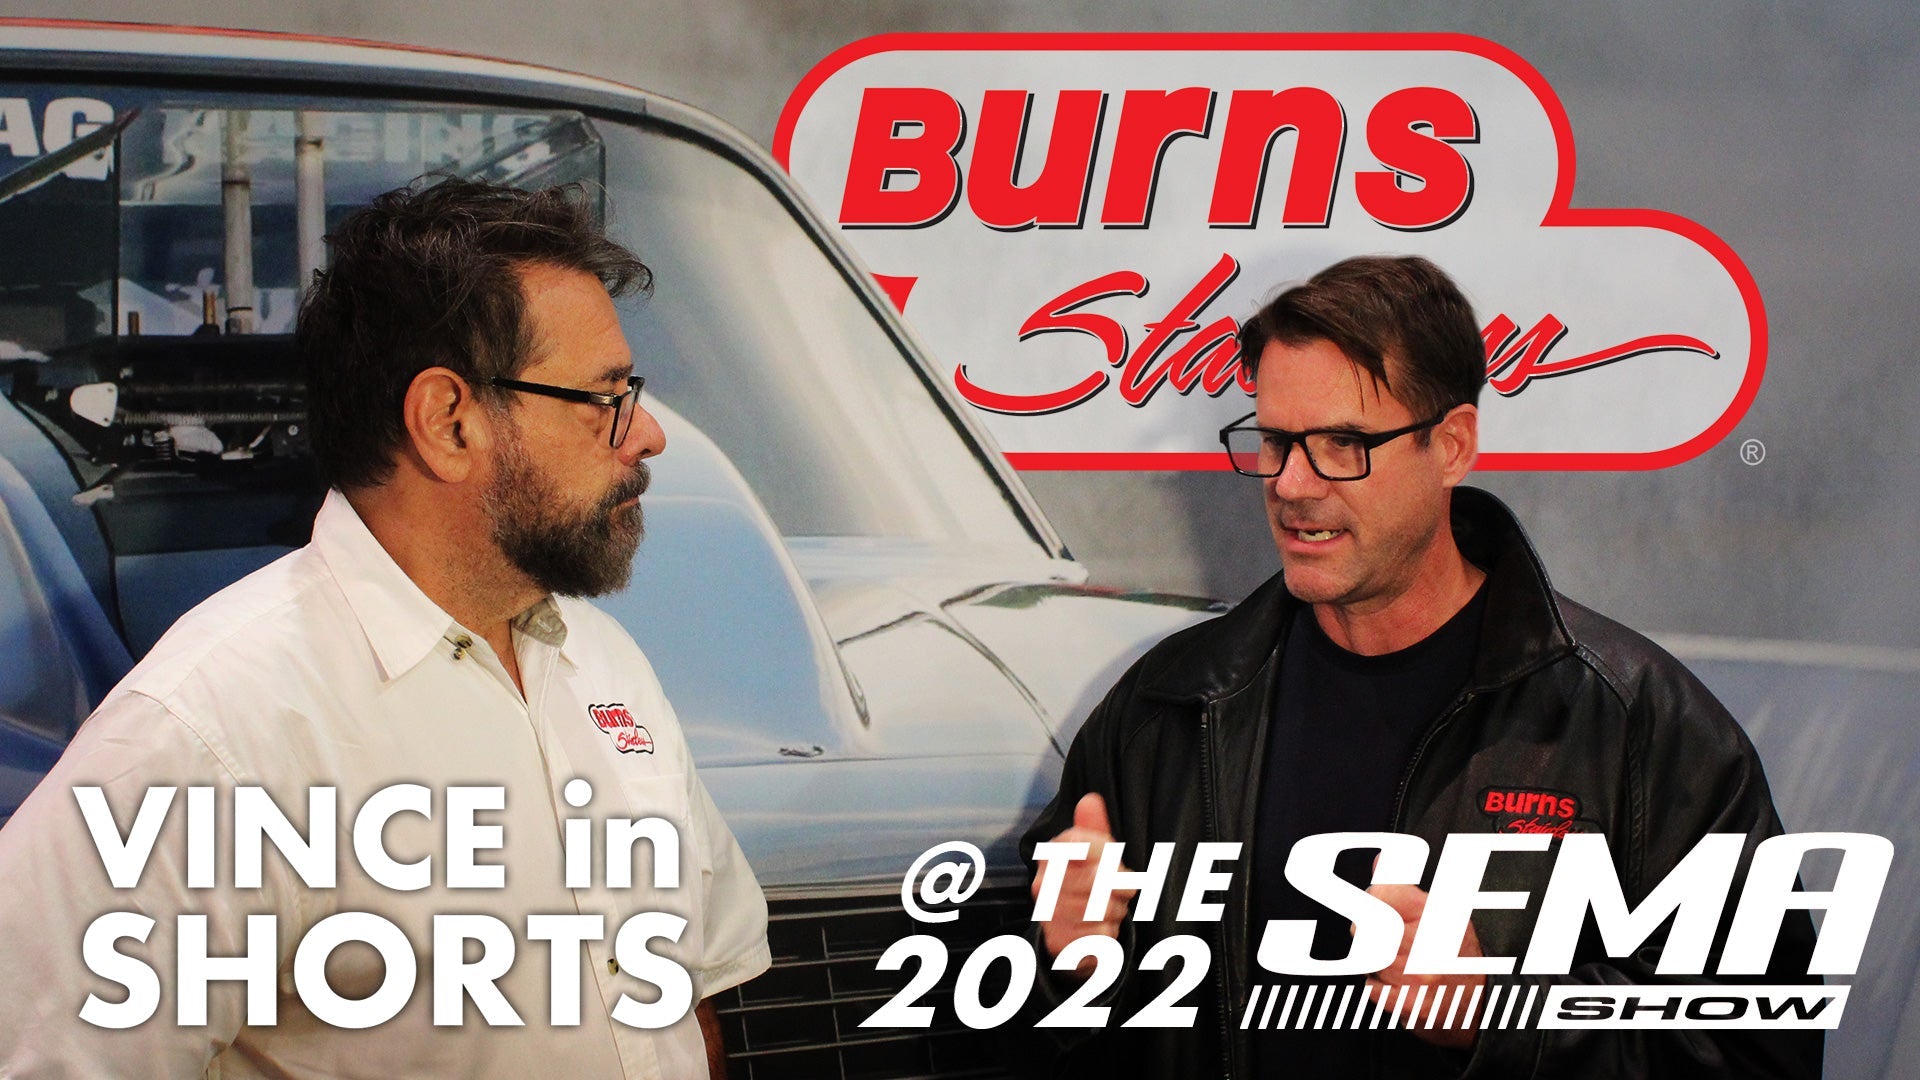 Vince In Shorts at the 2022 SEMA Show